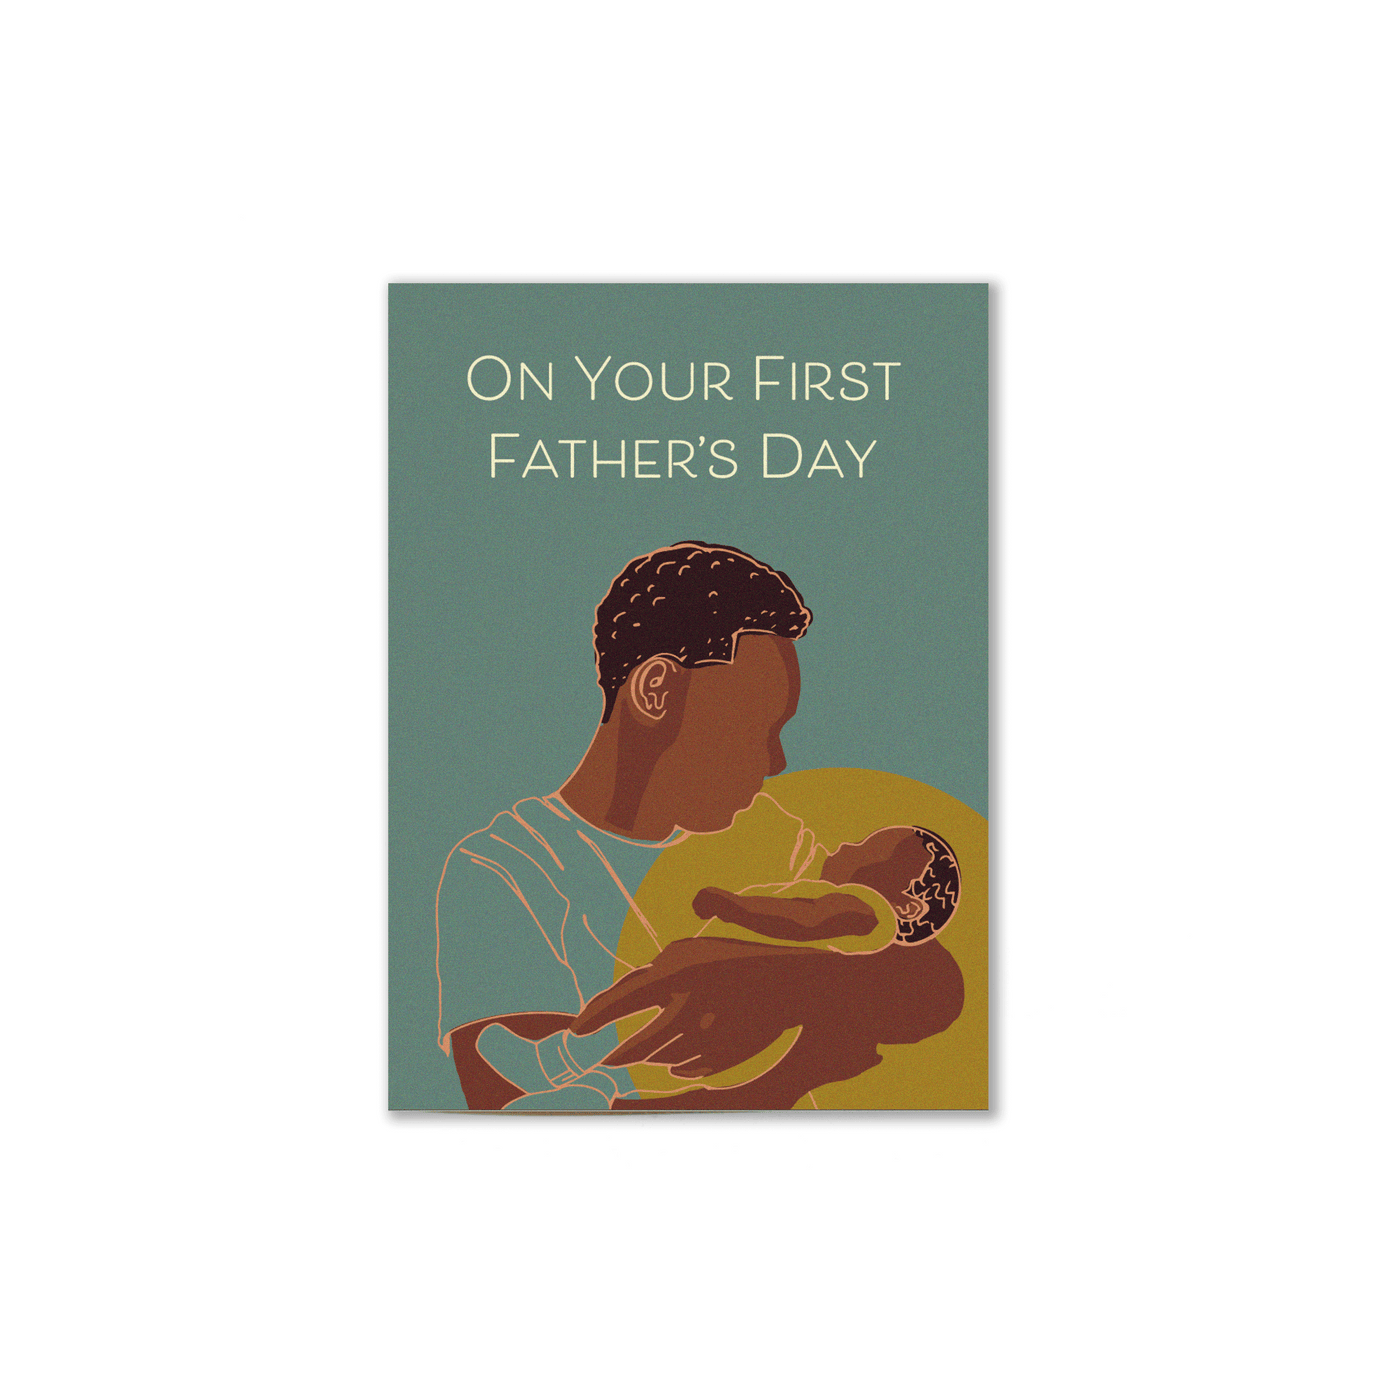 blue first father's day card that reads "On your first father's day" and illustrates a black dad holding his baby.